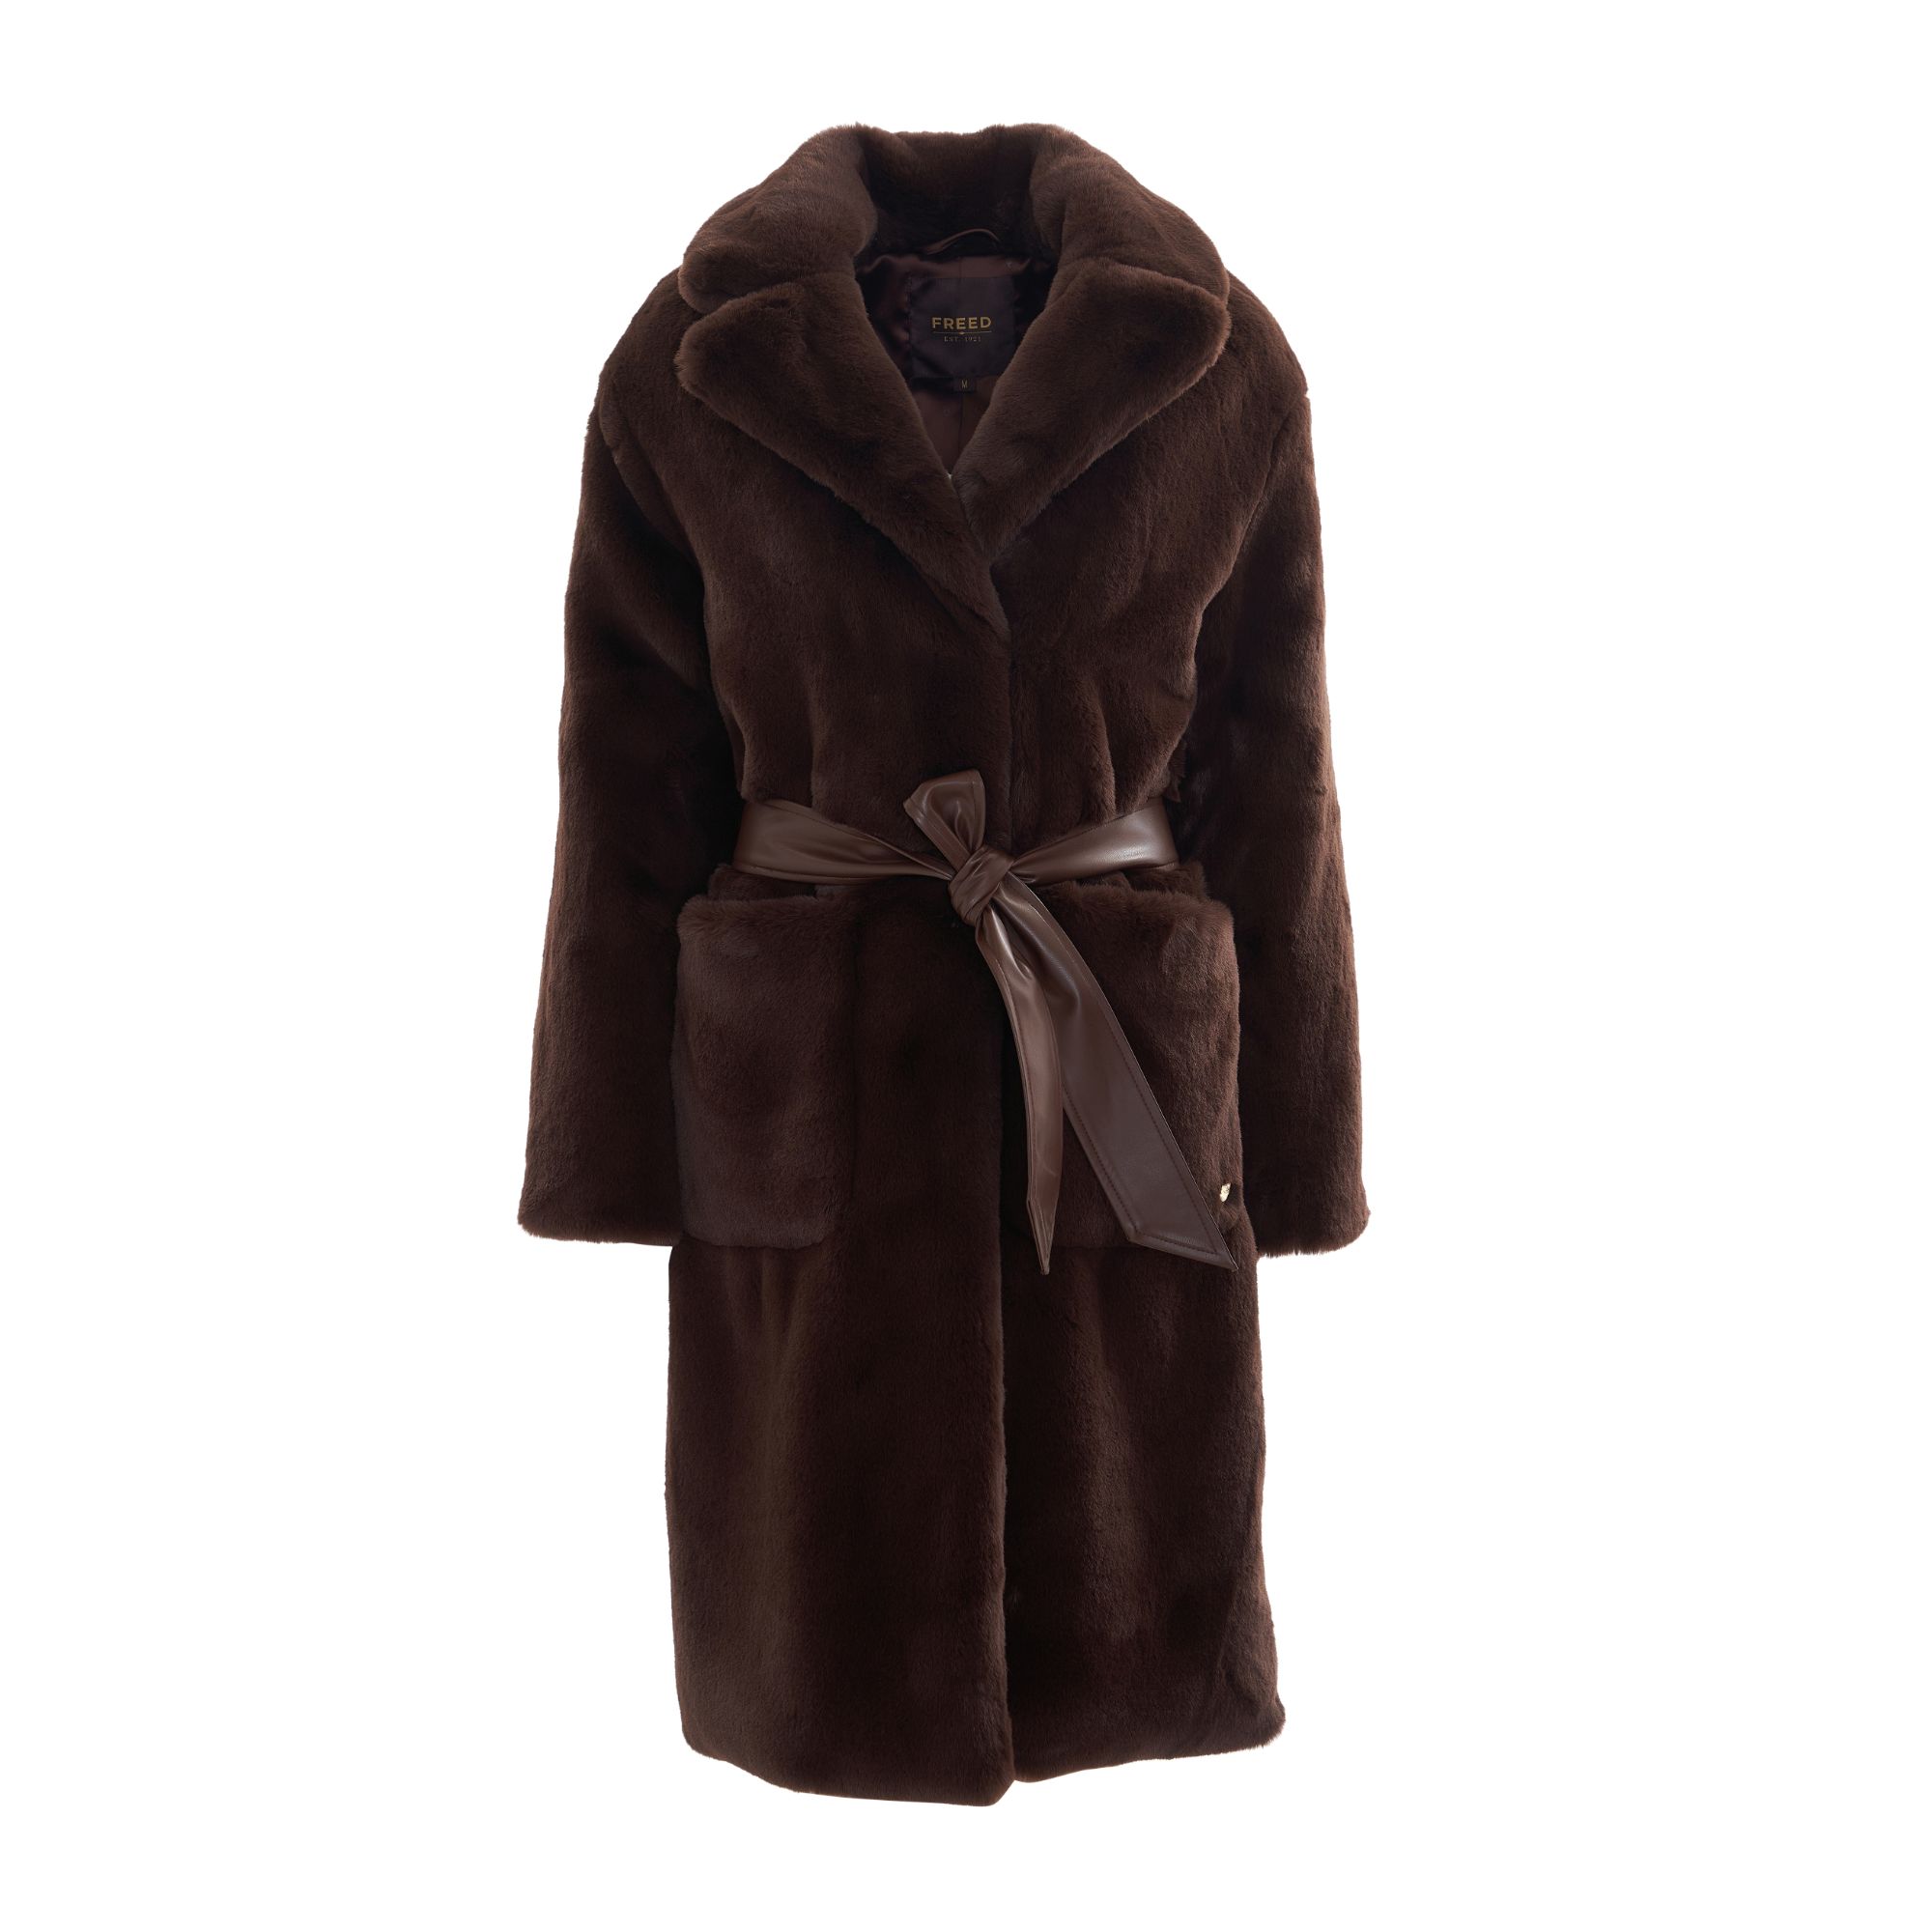 Freed Lily Oversized Faux Fur Coat Espresso